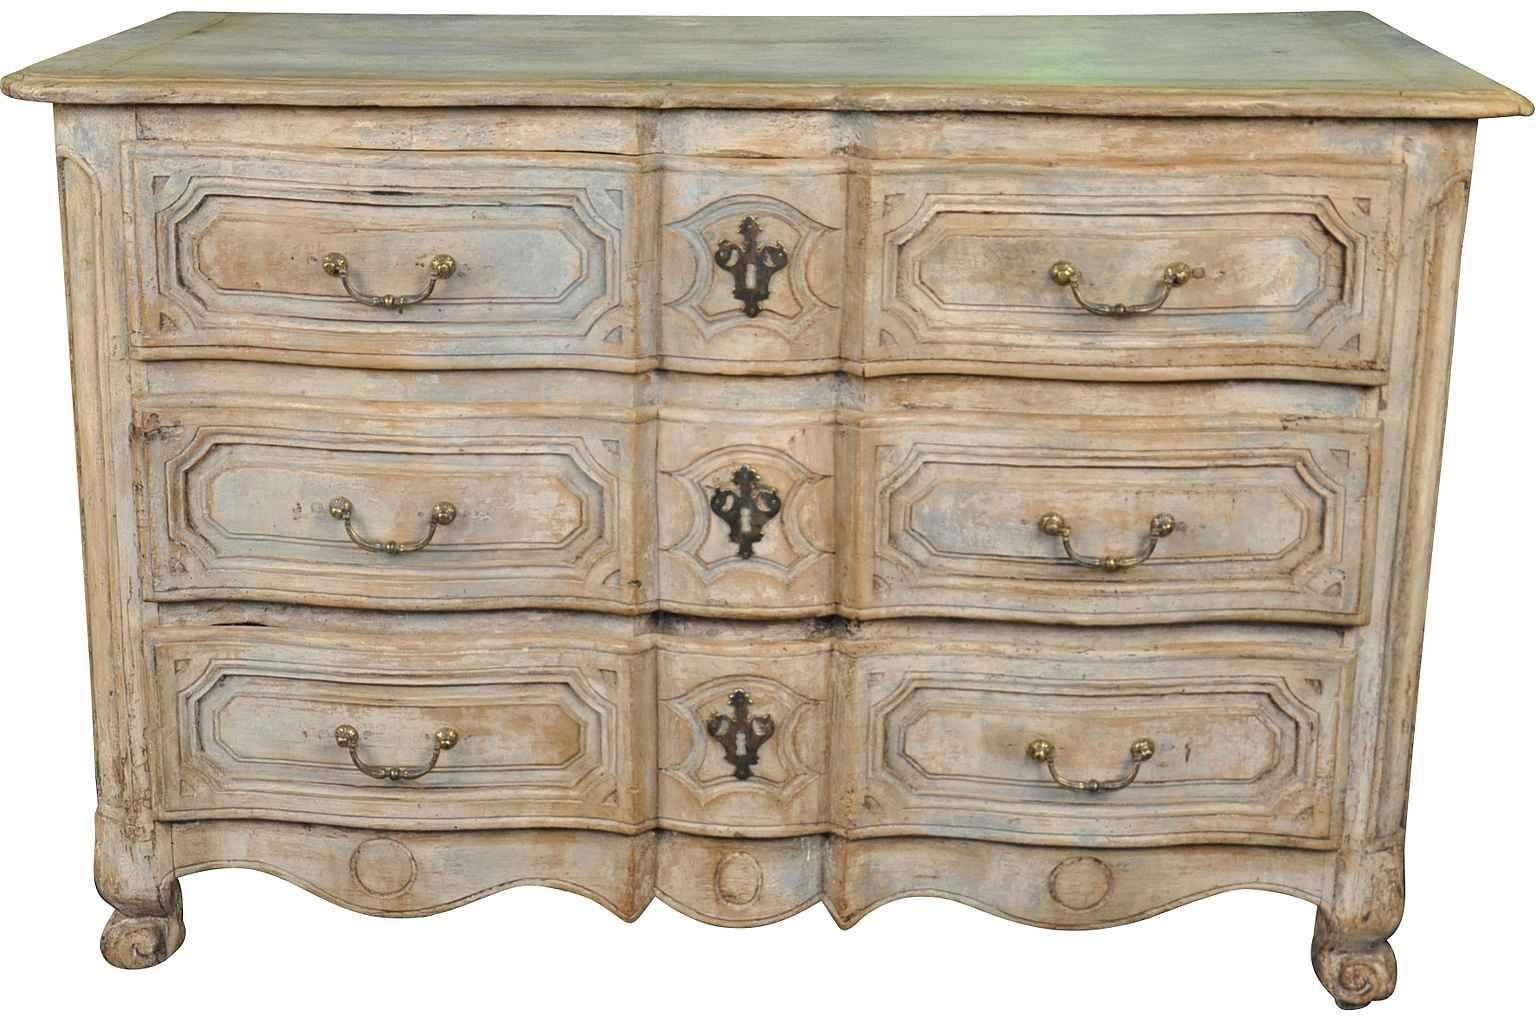 A very lovely early 19th century French Louis XIII style commode from the South of France. Beautifully constructed from walnut in the Arbalette shape. Very sound. Outstanding hardware. Wonderful painted finish and patina. Not only perfect as a